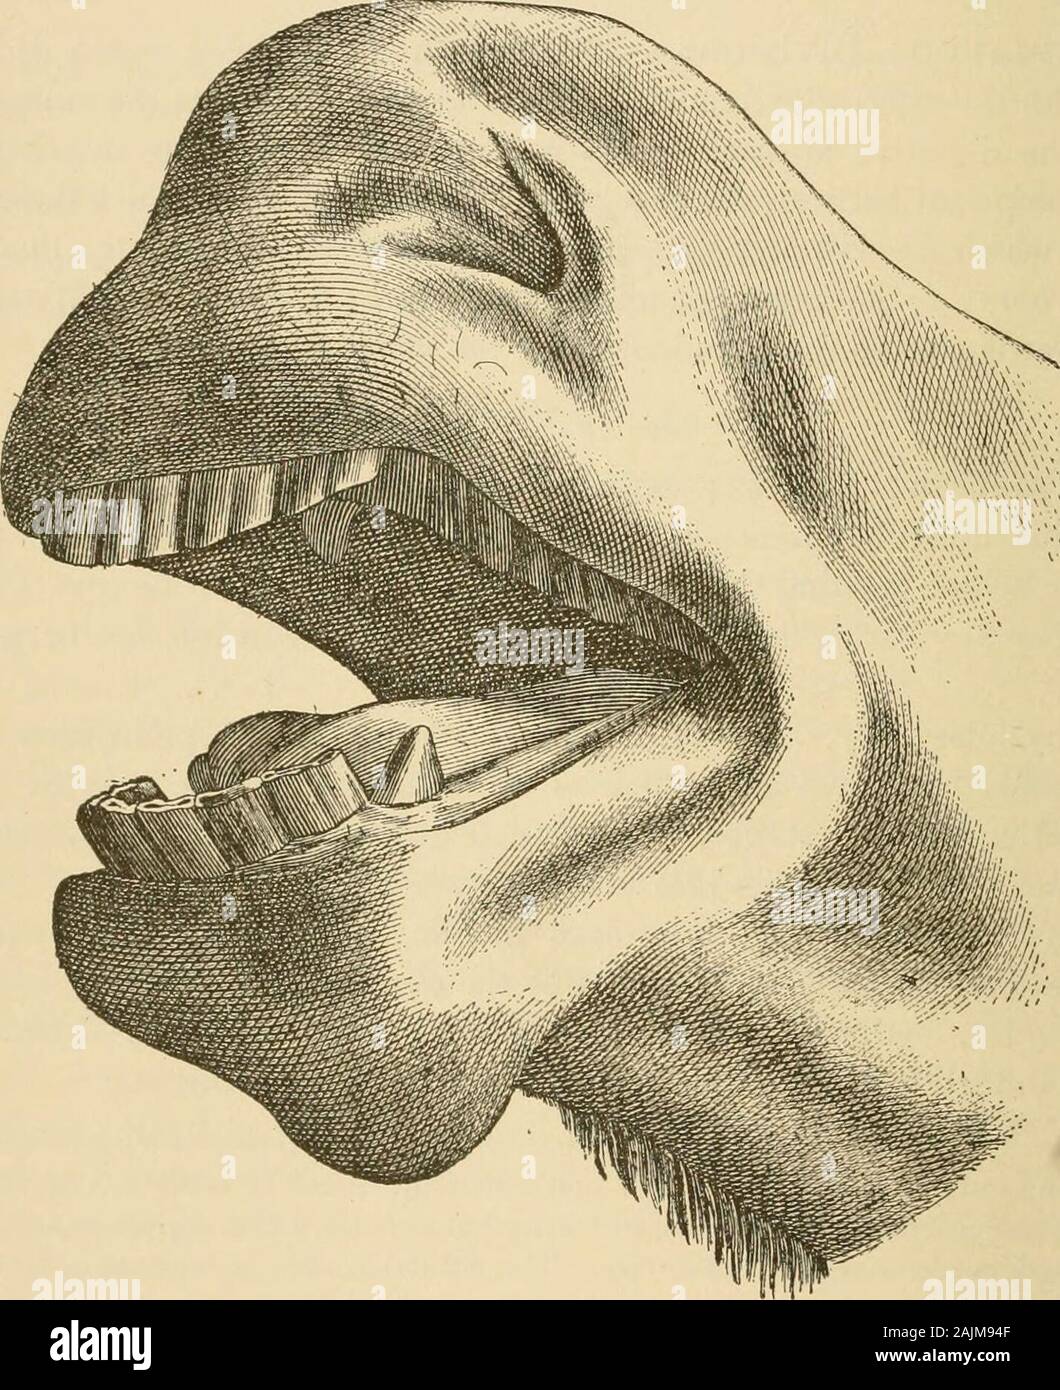 The exterior of the horse . skin,provided with two kinds of hairs : the one consisting of long, stiff, and scatteredhairs, called tentacles, and deeply embedded in the subcutaneous tissue and evenin the muscles ; the other, very fine, short, and numerous, belonging to the ordinaryhairs of the coat. The former are provided with a nerve terminal at the base oftheir papilla, which makes them delicate organs of tactile sensation for theanimal. To a large degree these supersede the function of the hand in quadru- 70 THE EXTERIOR OF THE HORSE. mana. The external face offers on the median line of the Stock Photo